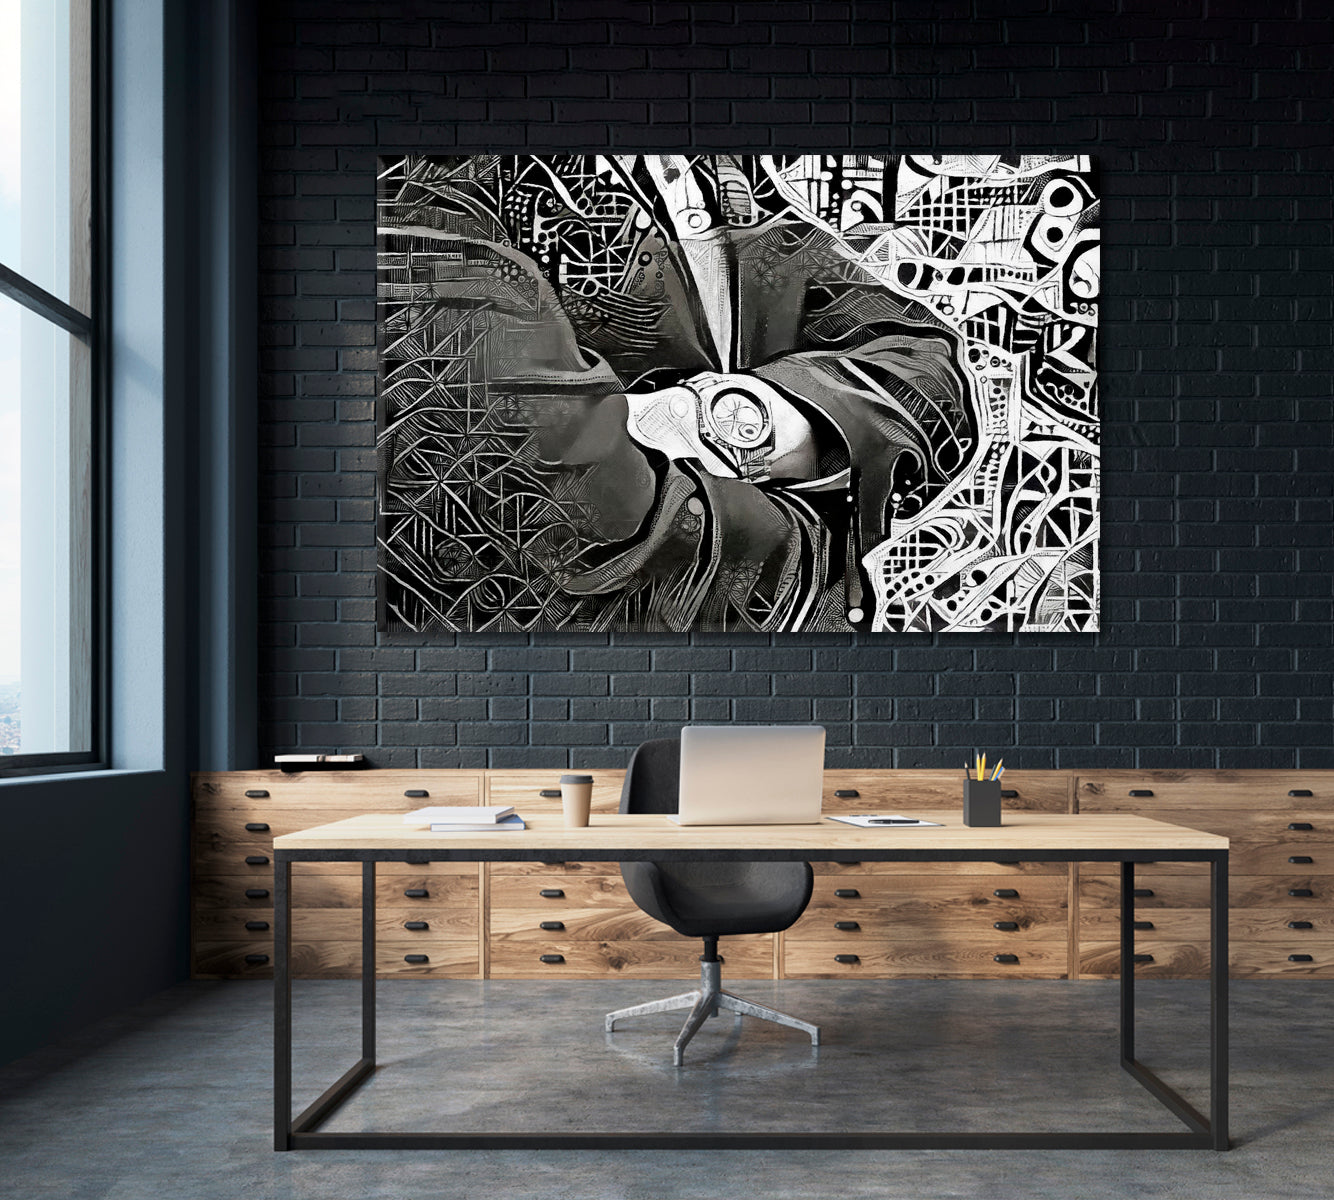 MAN WITH WATCH Abstract Geometric Modern Cubism Futurism Office Wall Art Canvas Print Artesty   